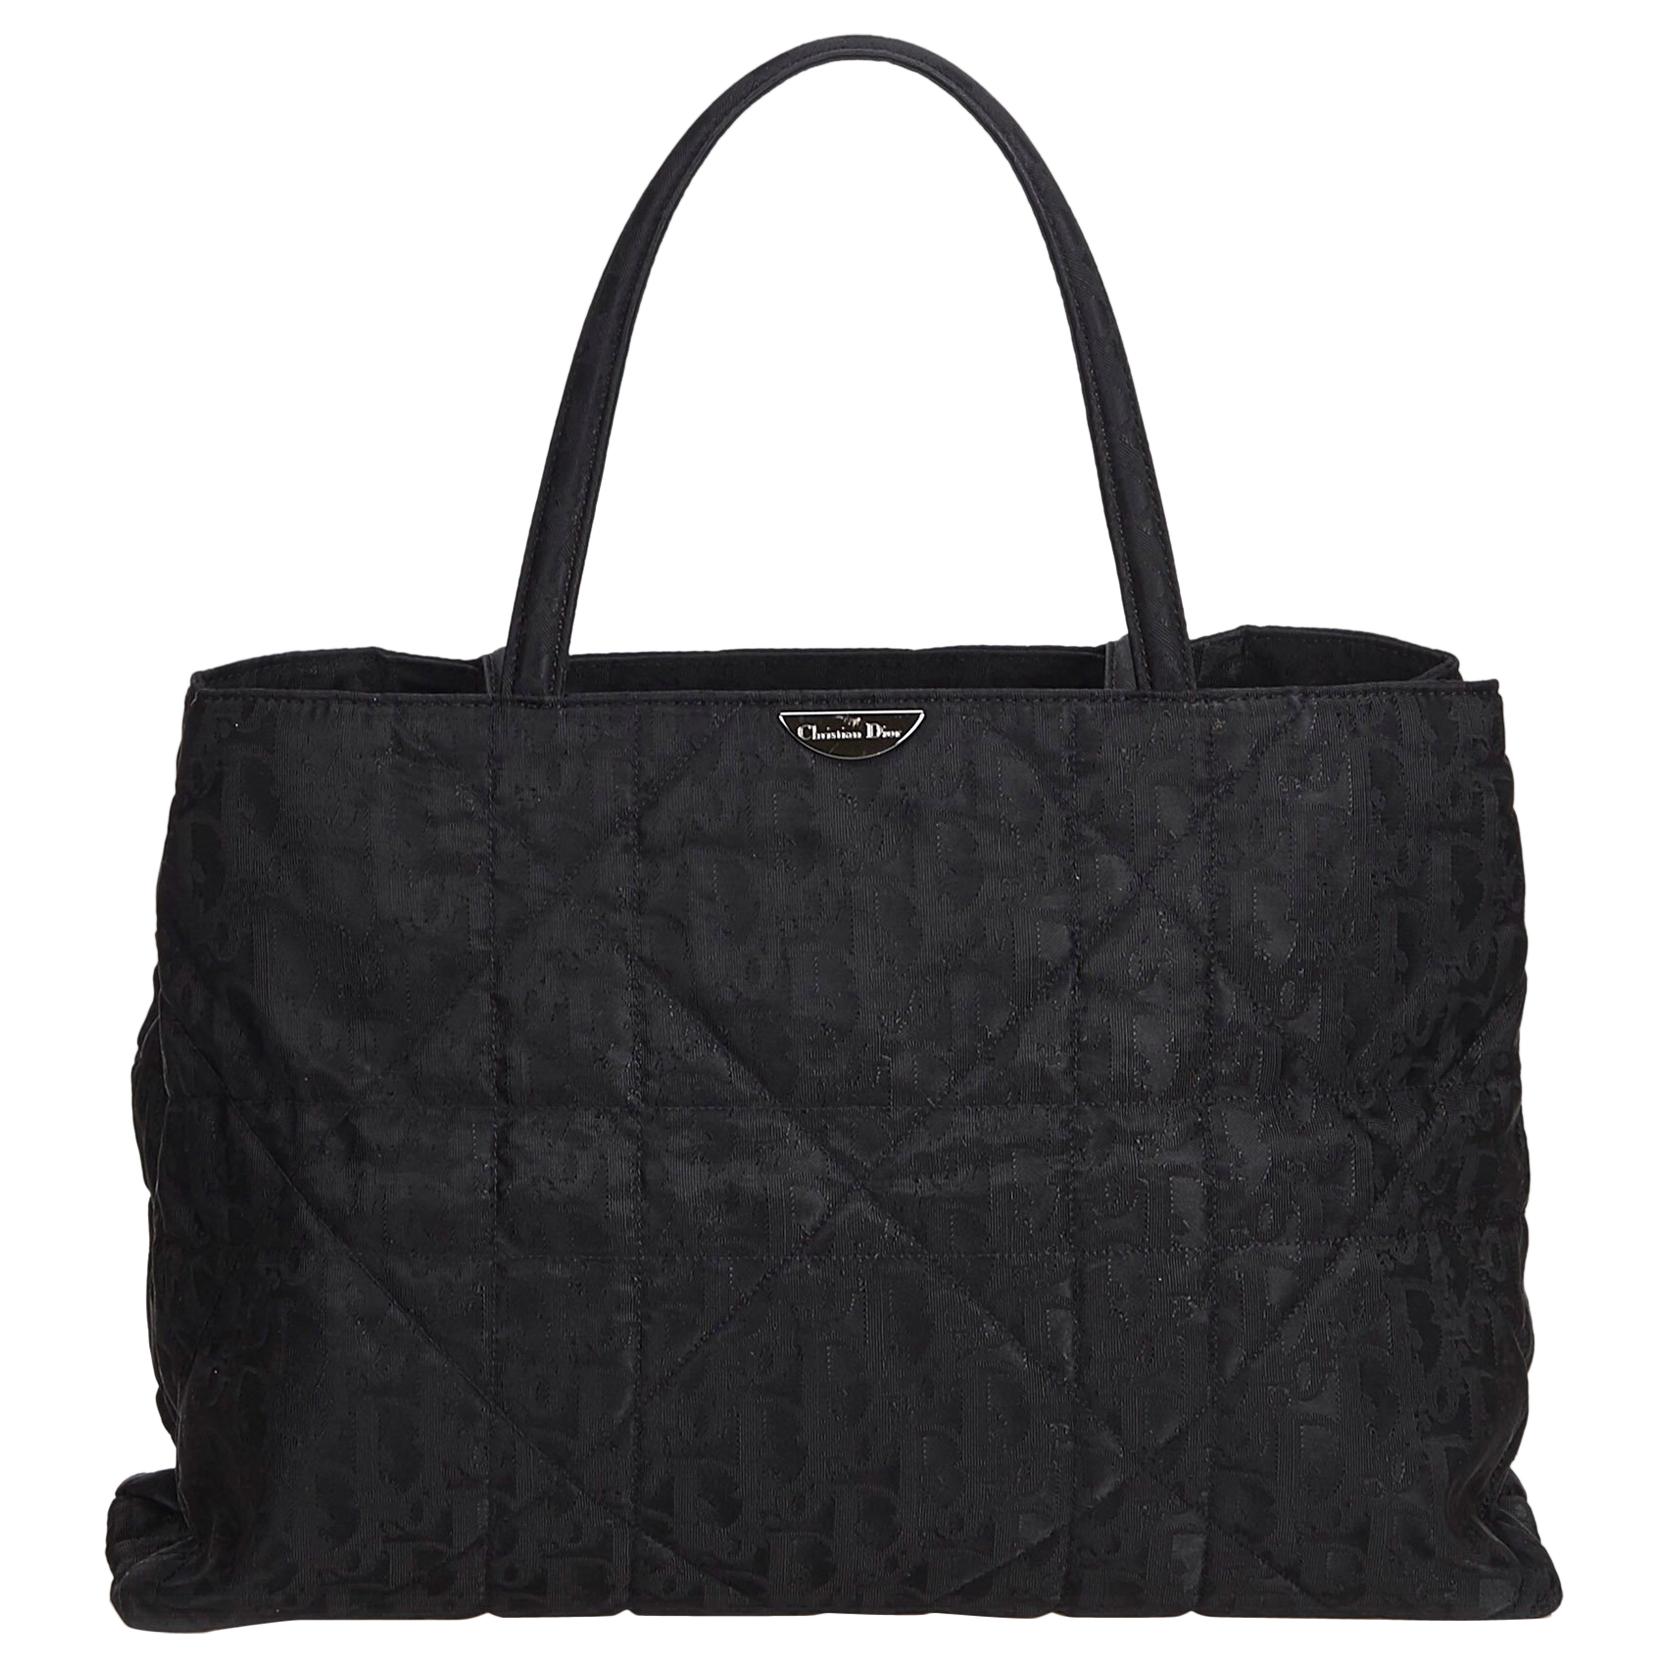 Dior Black Quilted Nylon Tote Bag For Sale